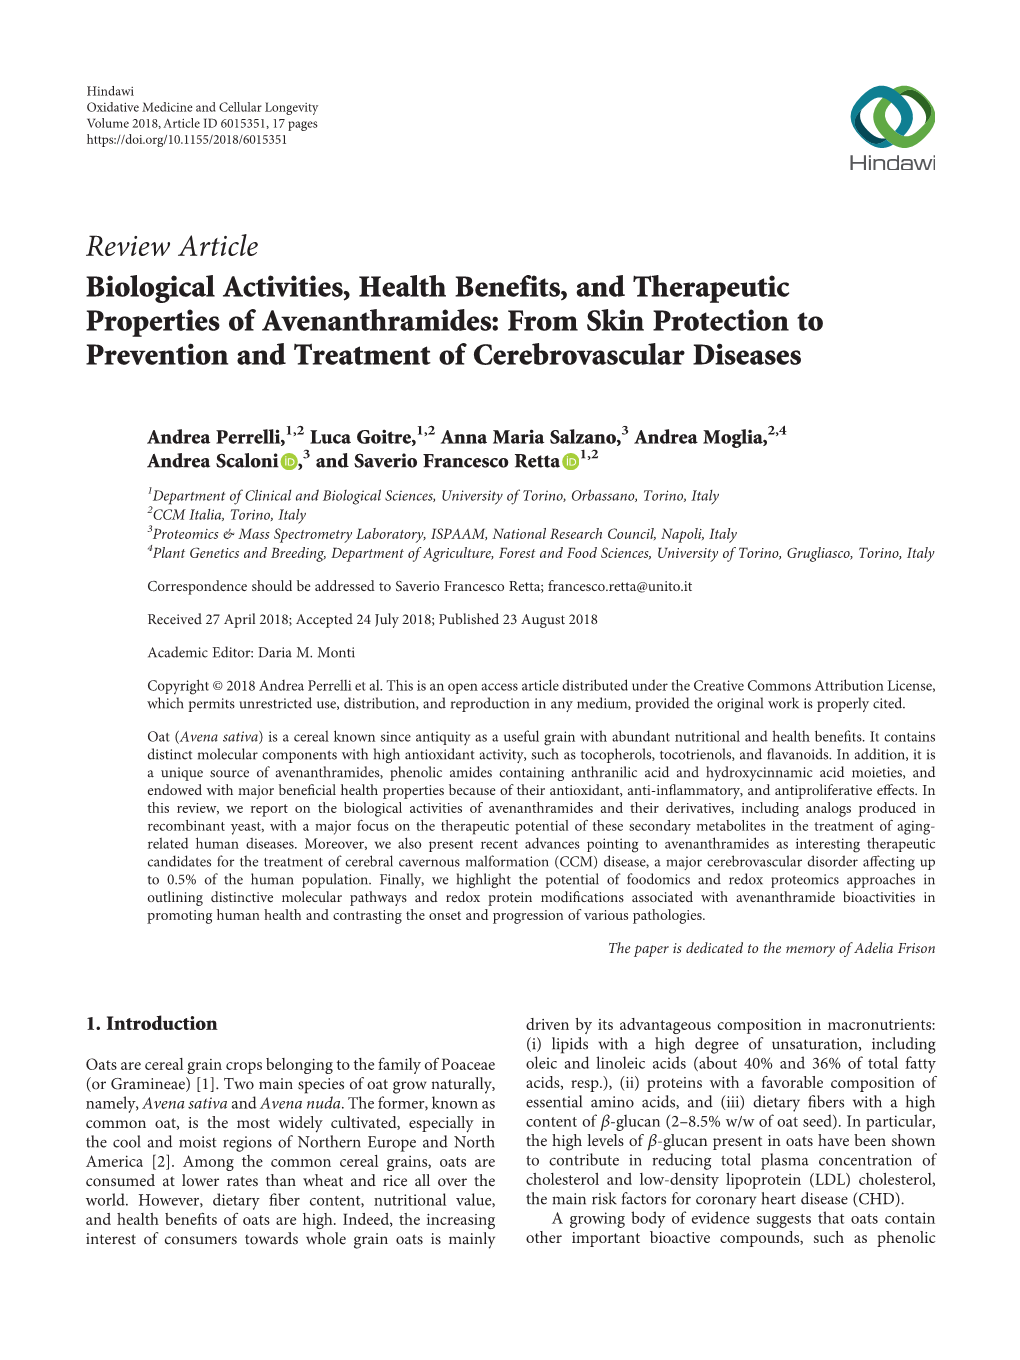 Biological Activities, Health Benefits, and Therapeutic Properties of Avenanthramides: from Skin Protection to Prevention and Treatment of Cerebrovascular Diseases